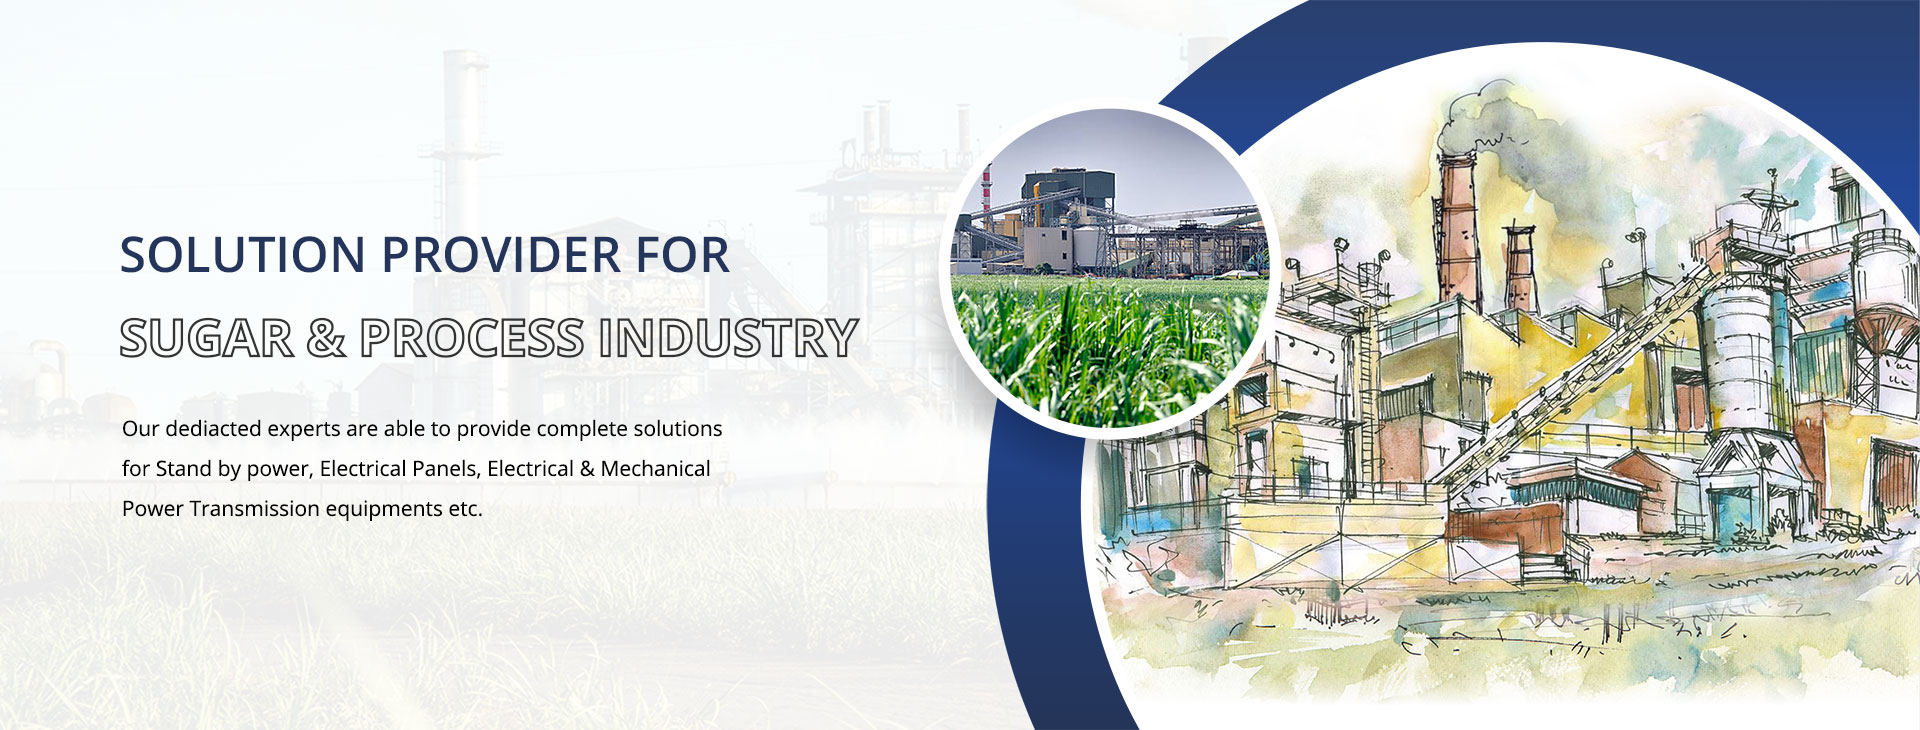 reliable and efficient solution provider for Sugar & Process Industry. Our dediacted experts are able to provide complete solutions for Stand by power, Electrical Panels, Electrical & Mechanical Power Transmission equipments etc.